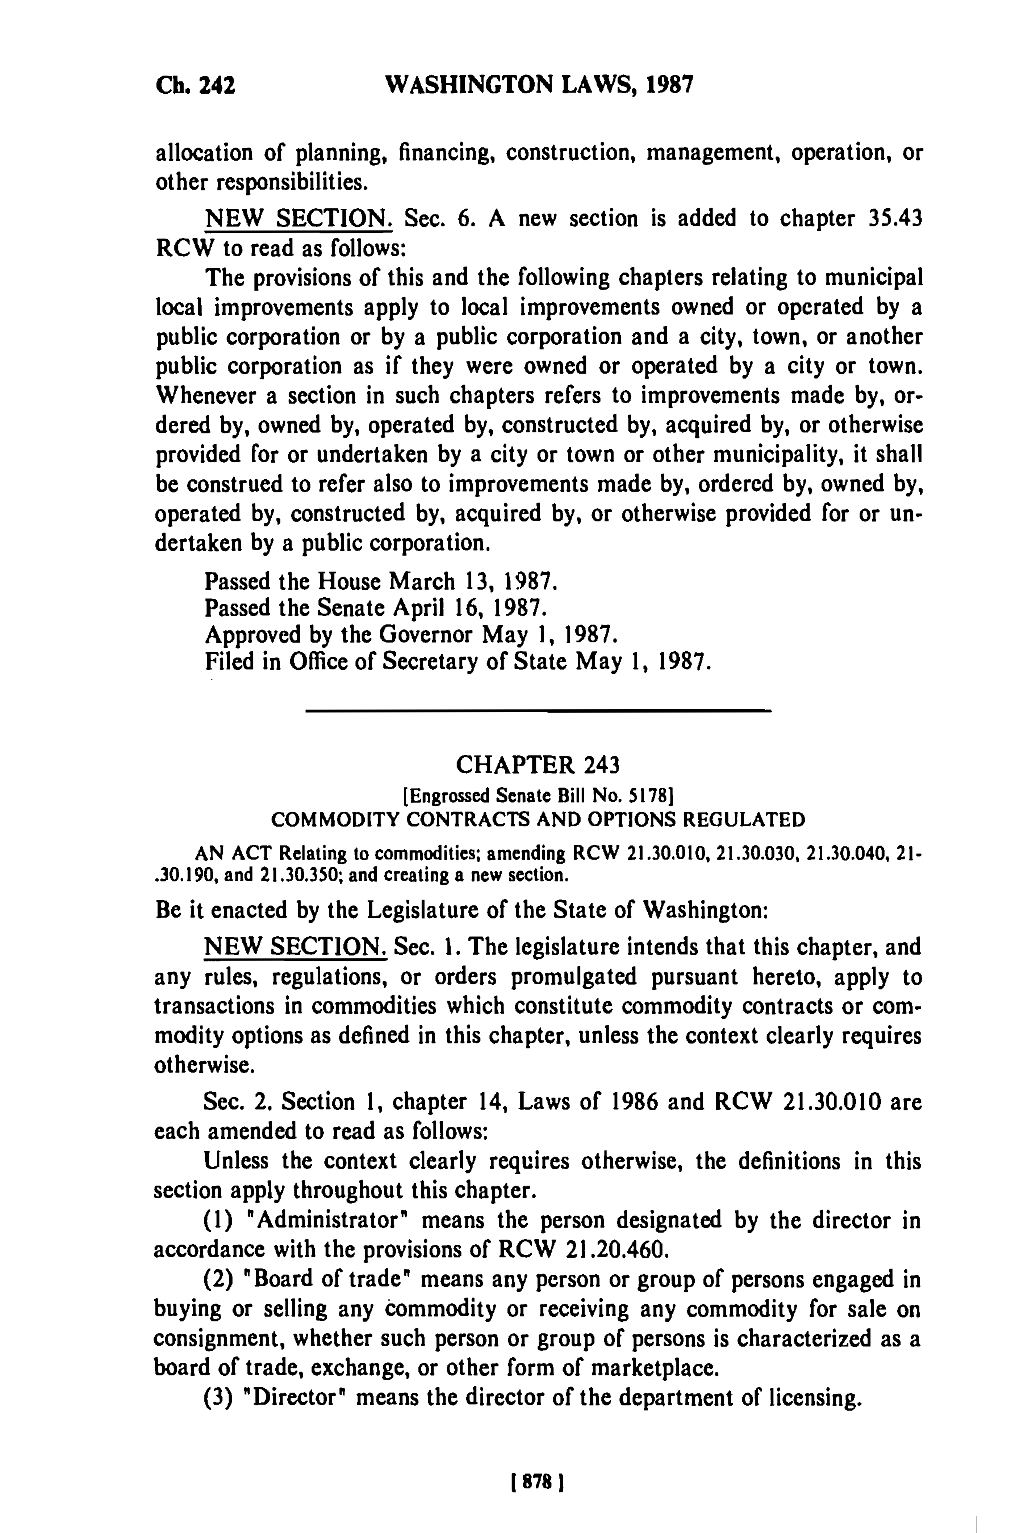 WASHINGTON LAWS, 1987 Allocation of Planning, Financing, Construction, Management, Operation, Or Other Responsibilities. NEW